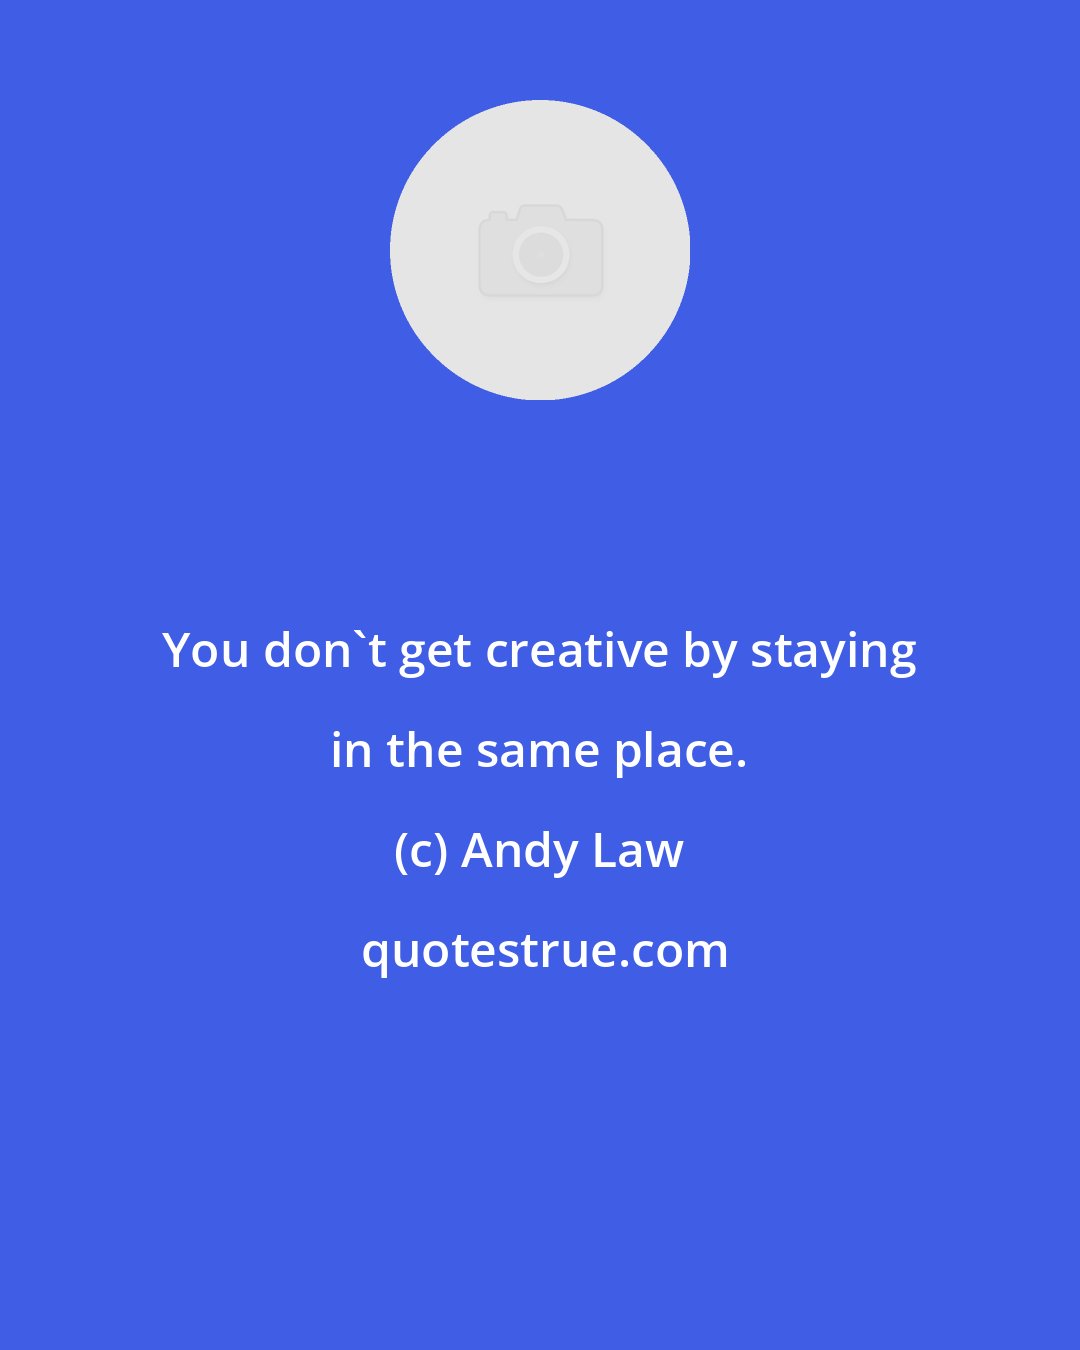 Andy Law: You don't get creative by staying in the same place.